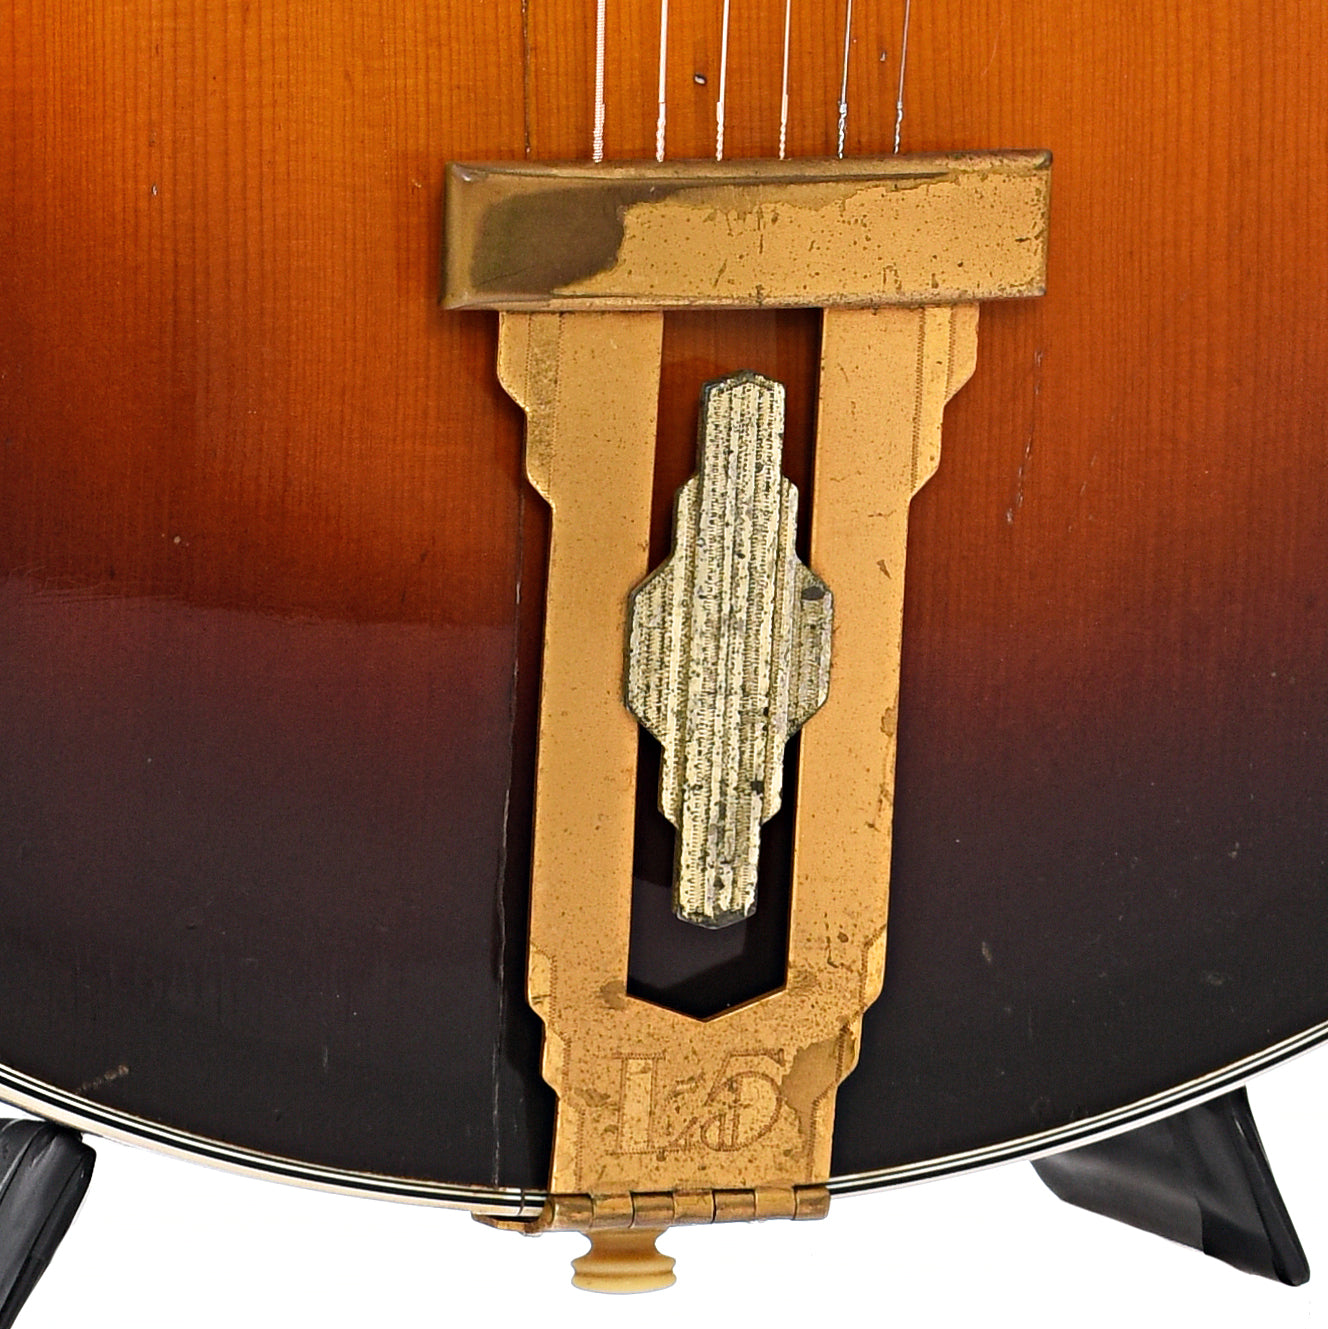 Tailpiece of Gibson L-5 Hollowbody Electric